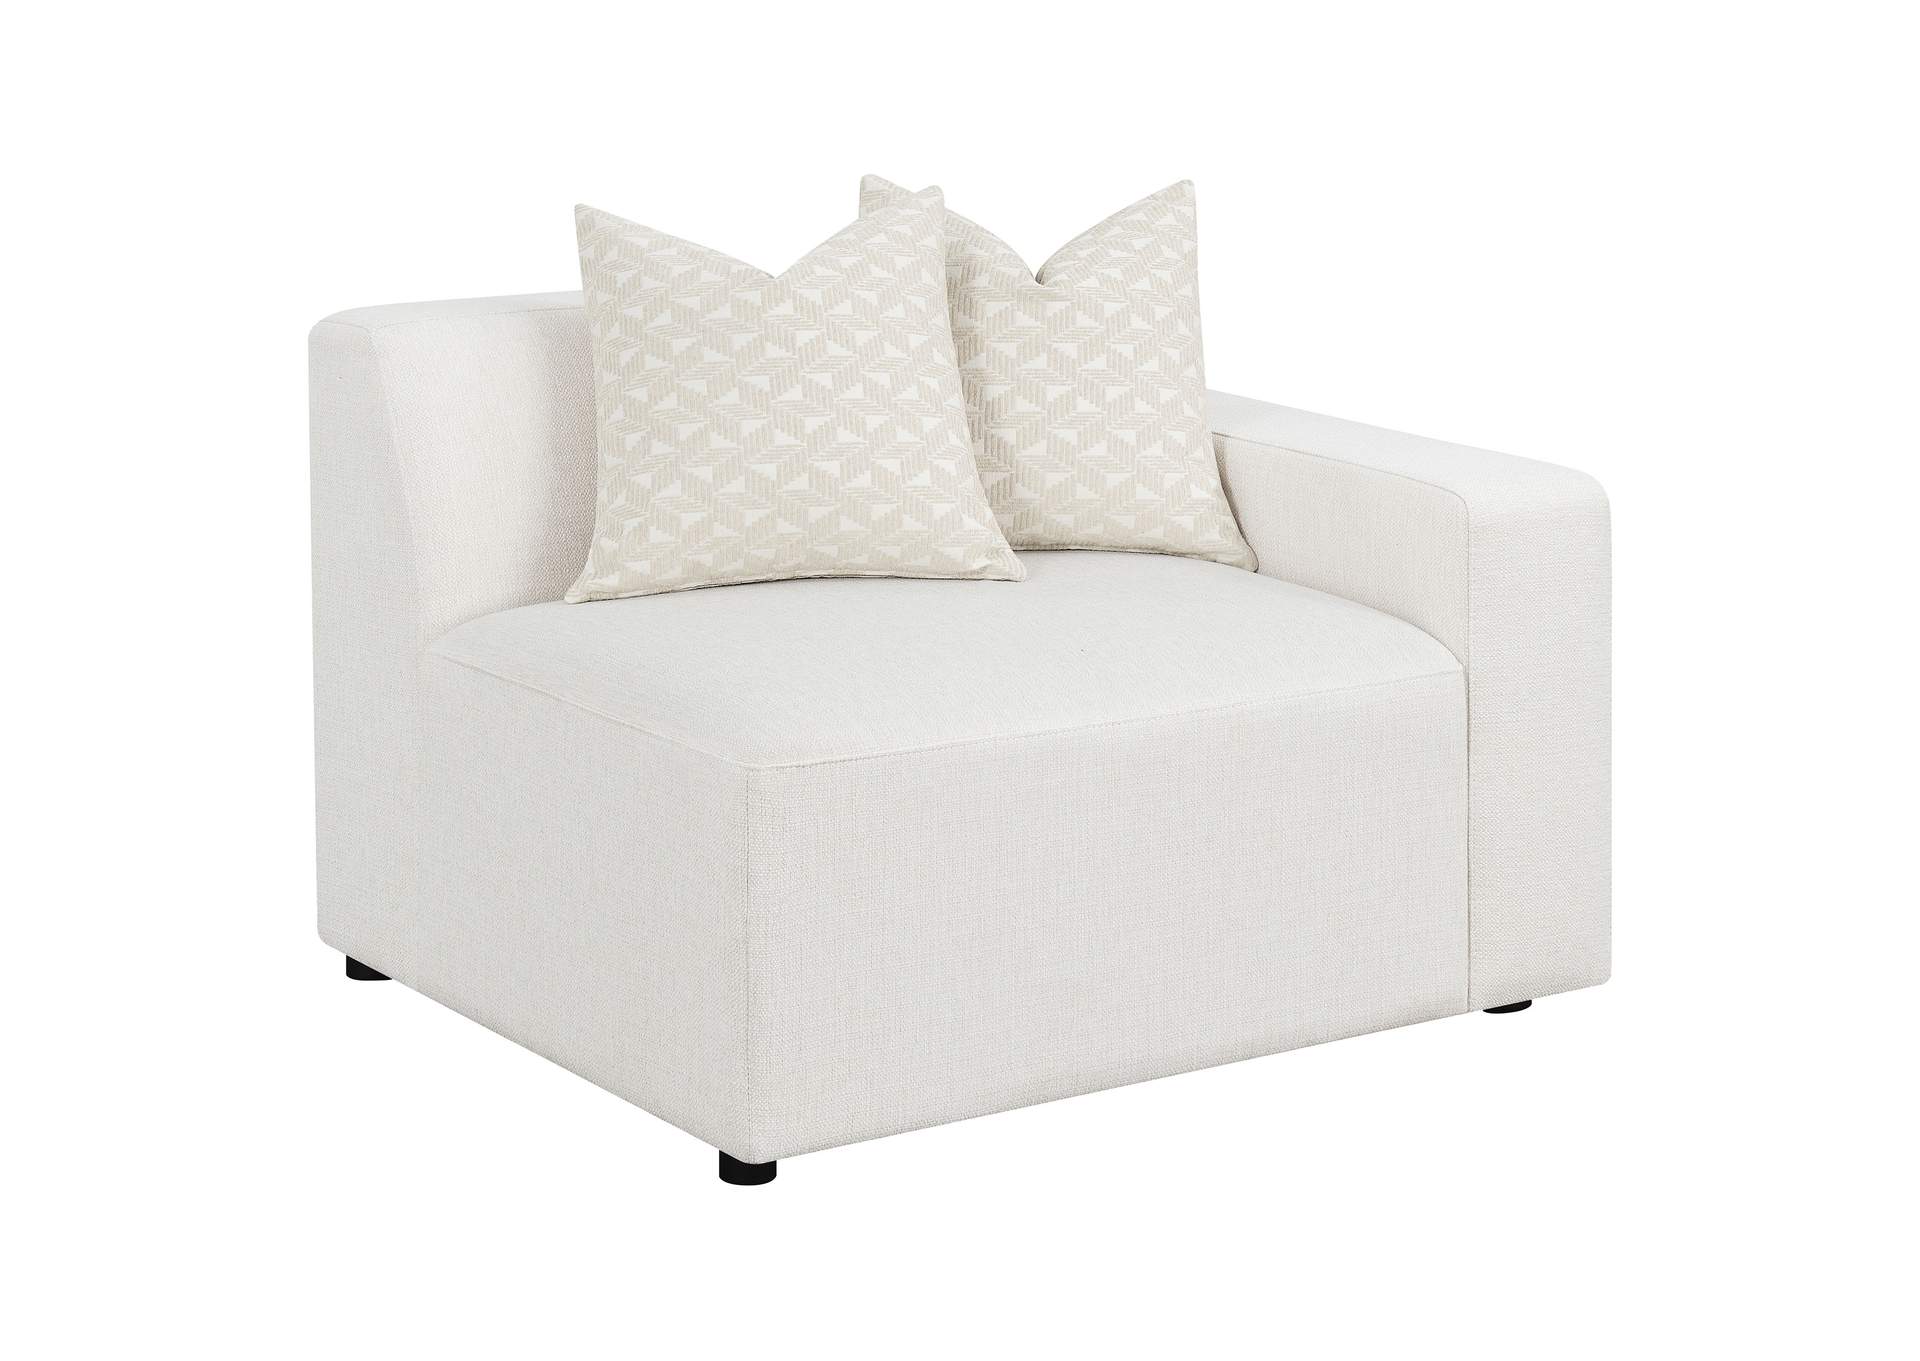 Freddie 6-piece Upholstered Modular Sectional Pearl,Coaster Furniture